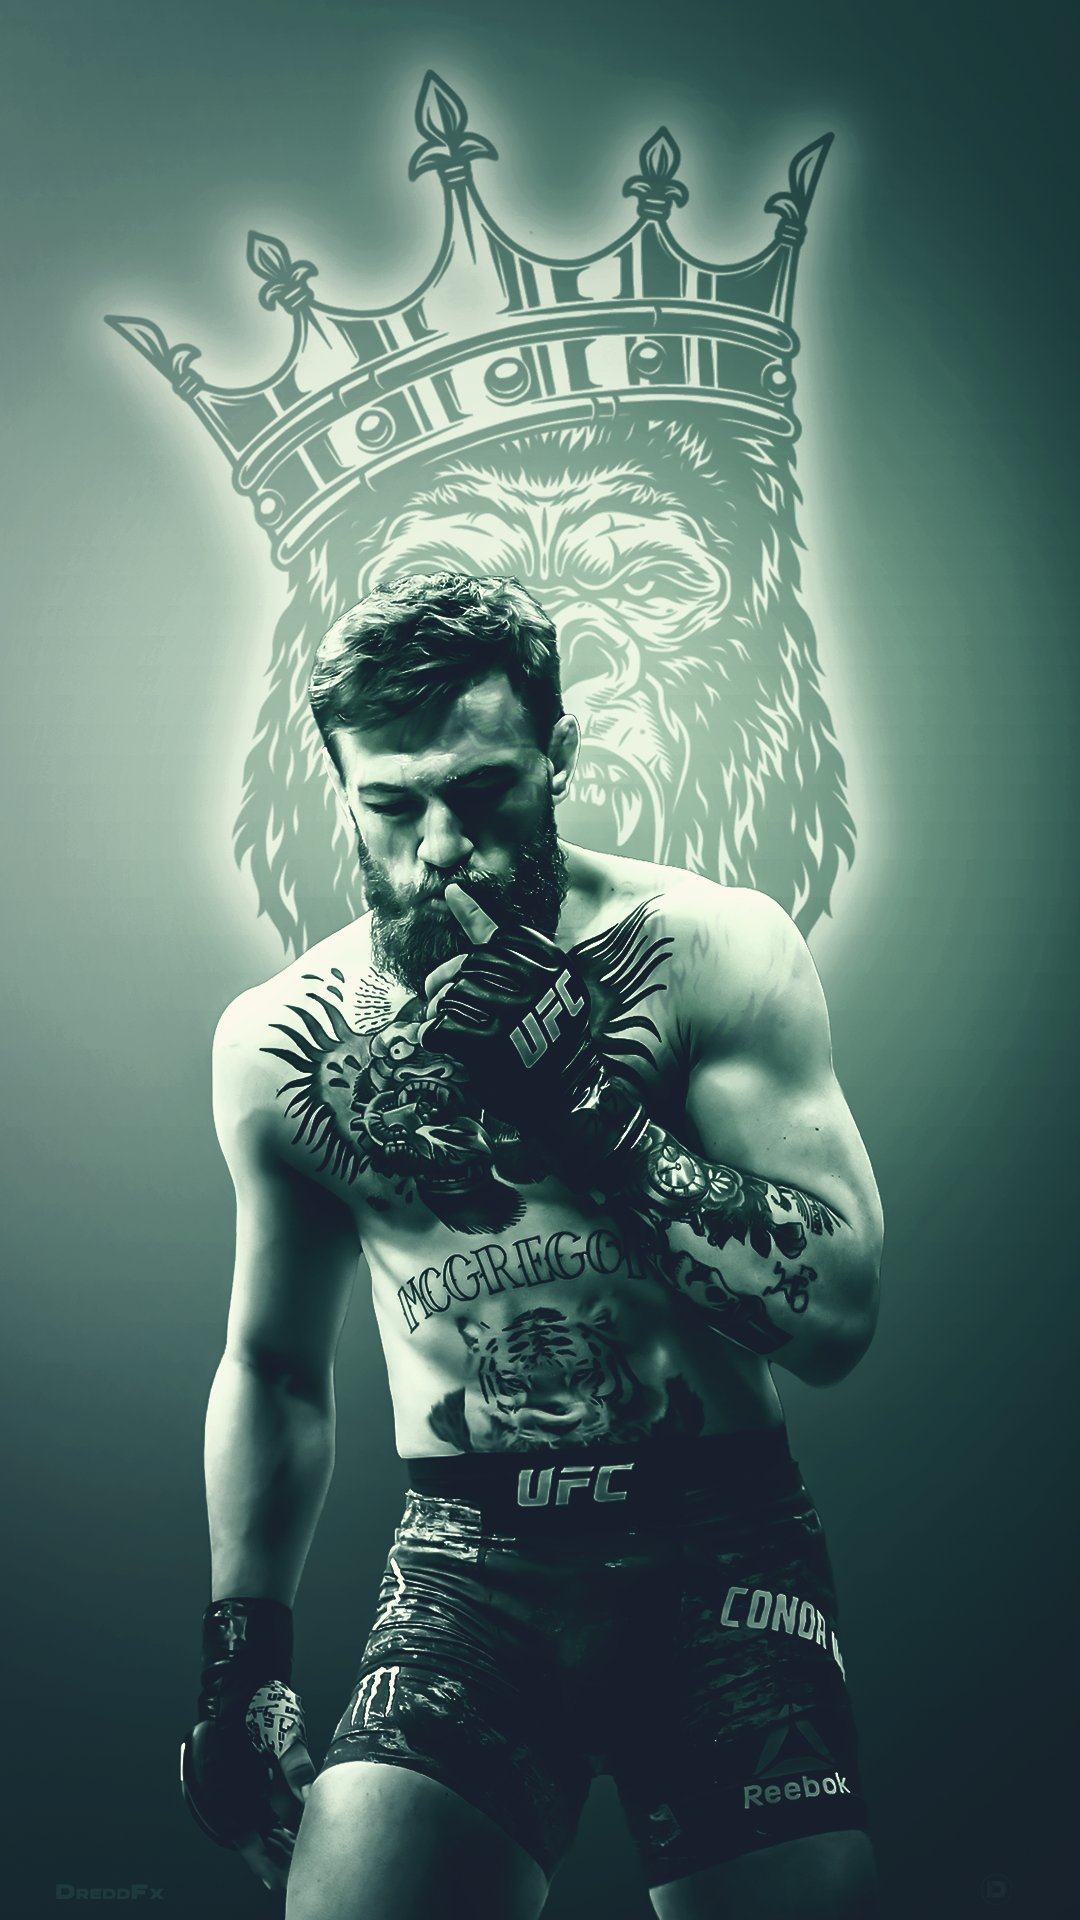 1080x1920 Made a Conor McGregor wallpaper, hope you like it : ufc